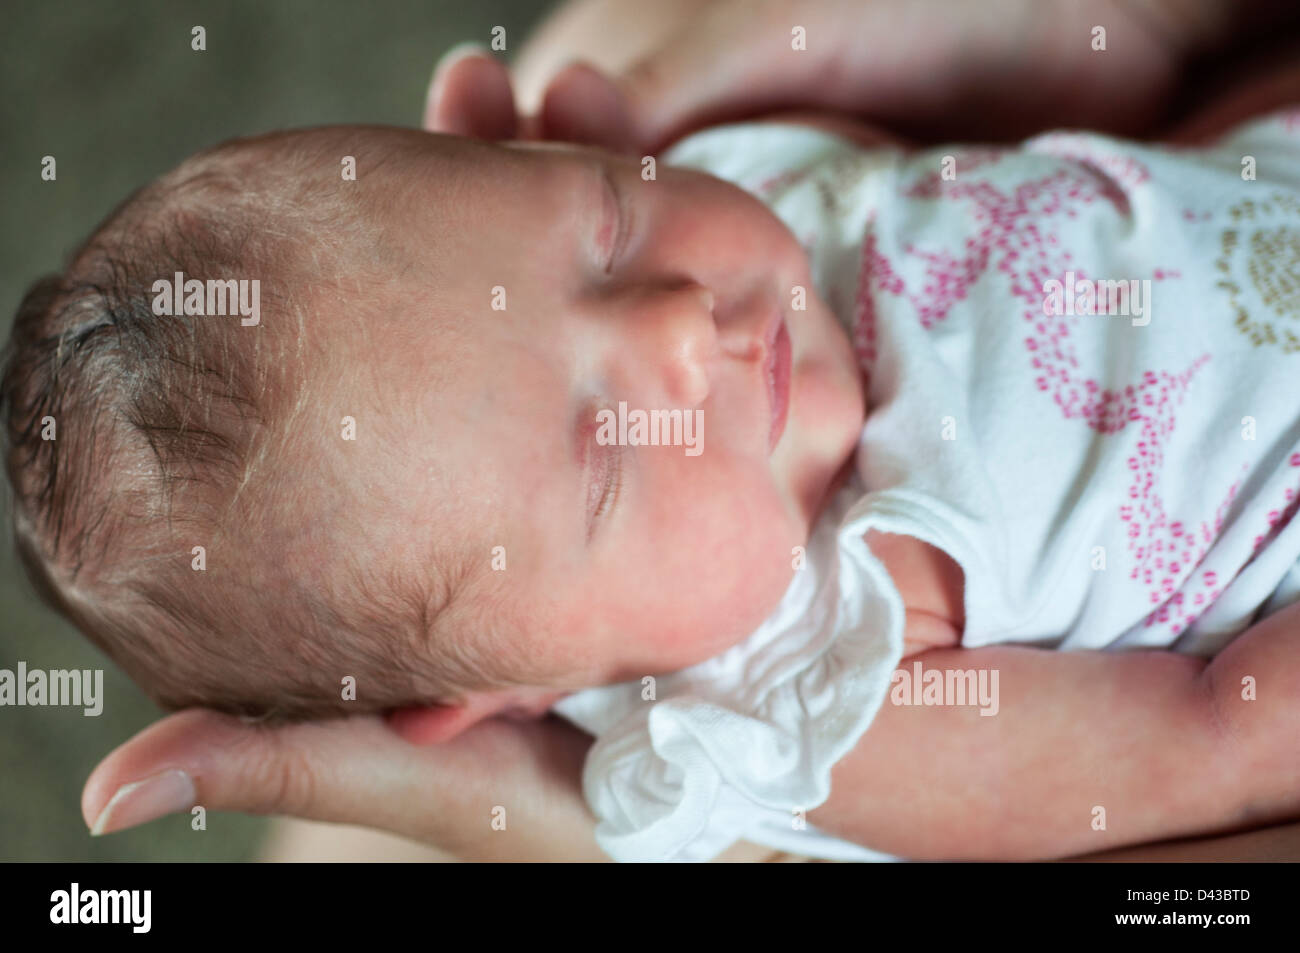 sleeping newborn infant baby girl being held by a woman Stock Photo